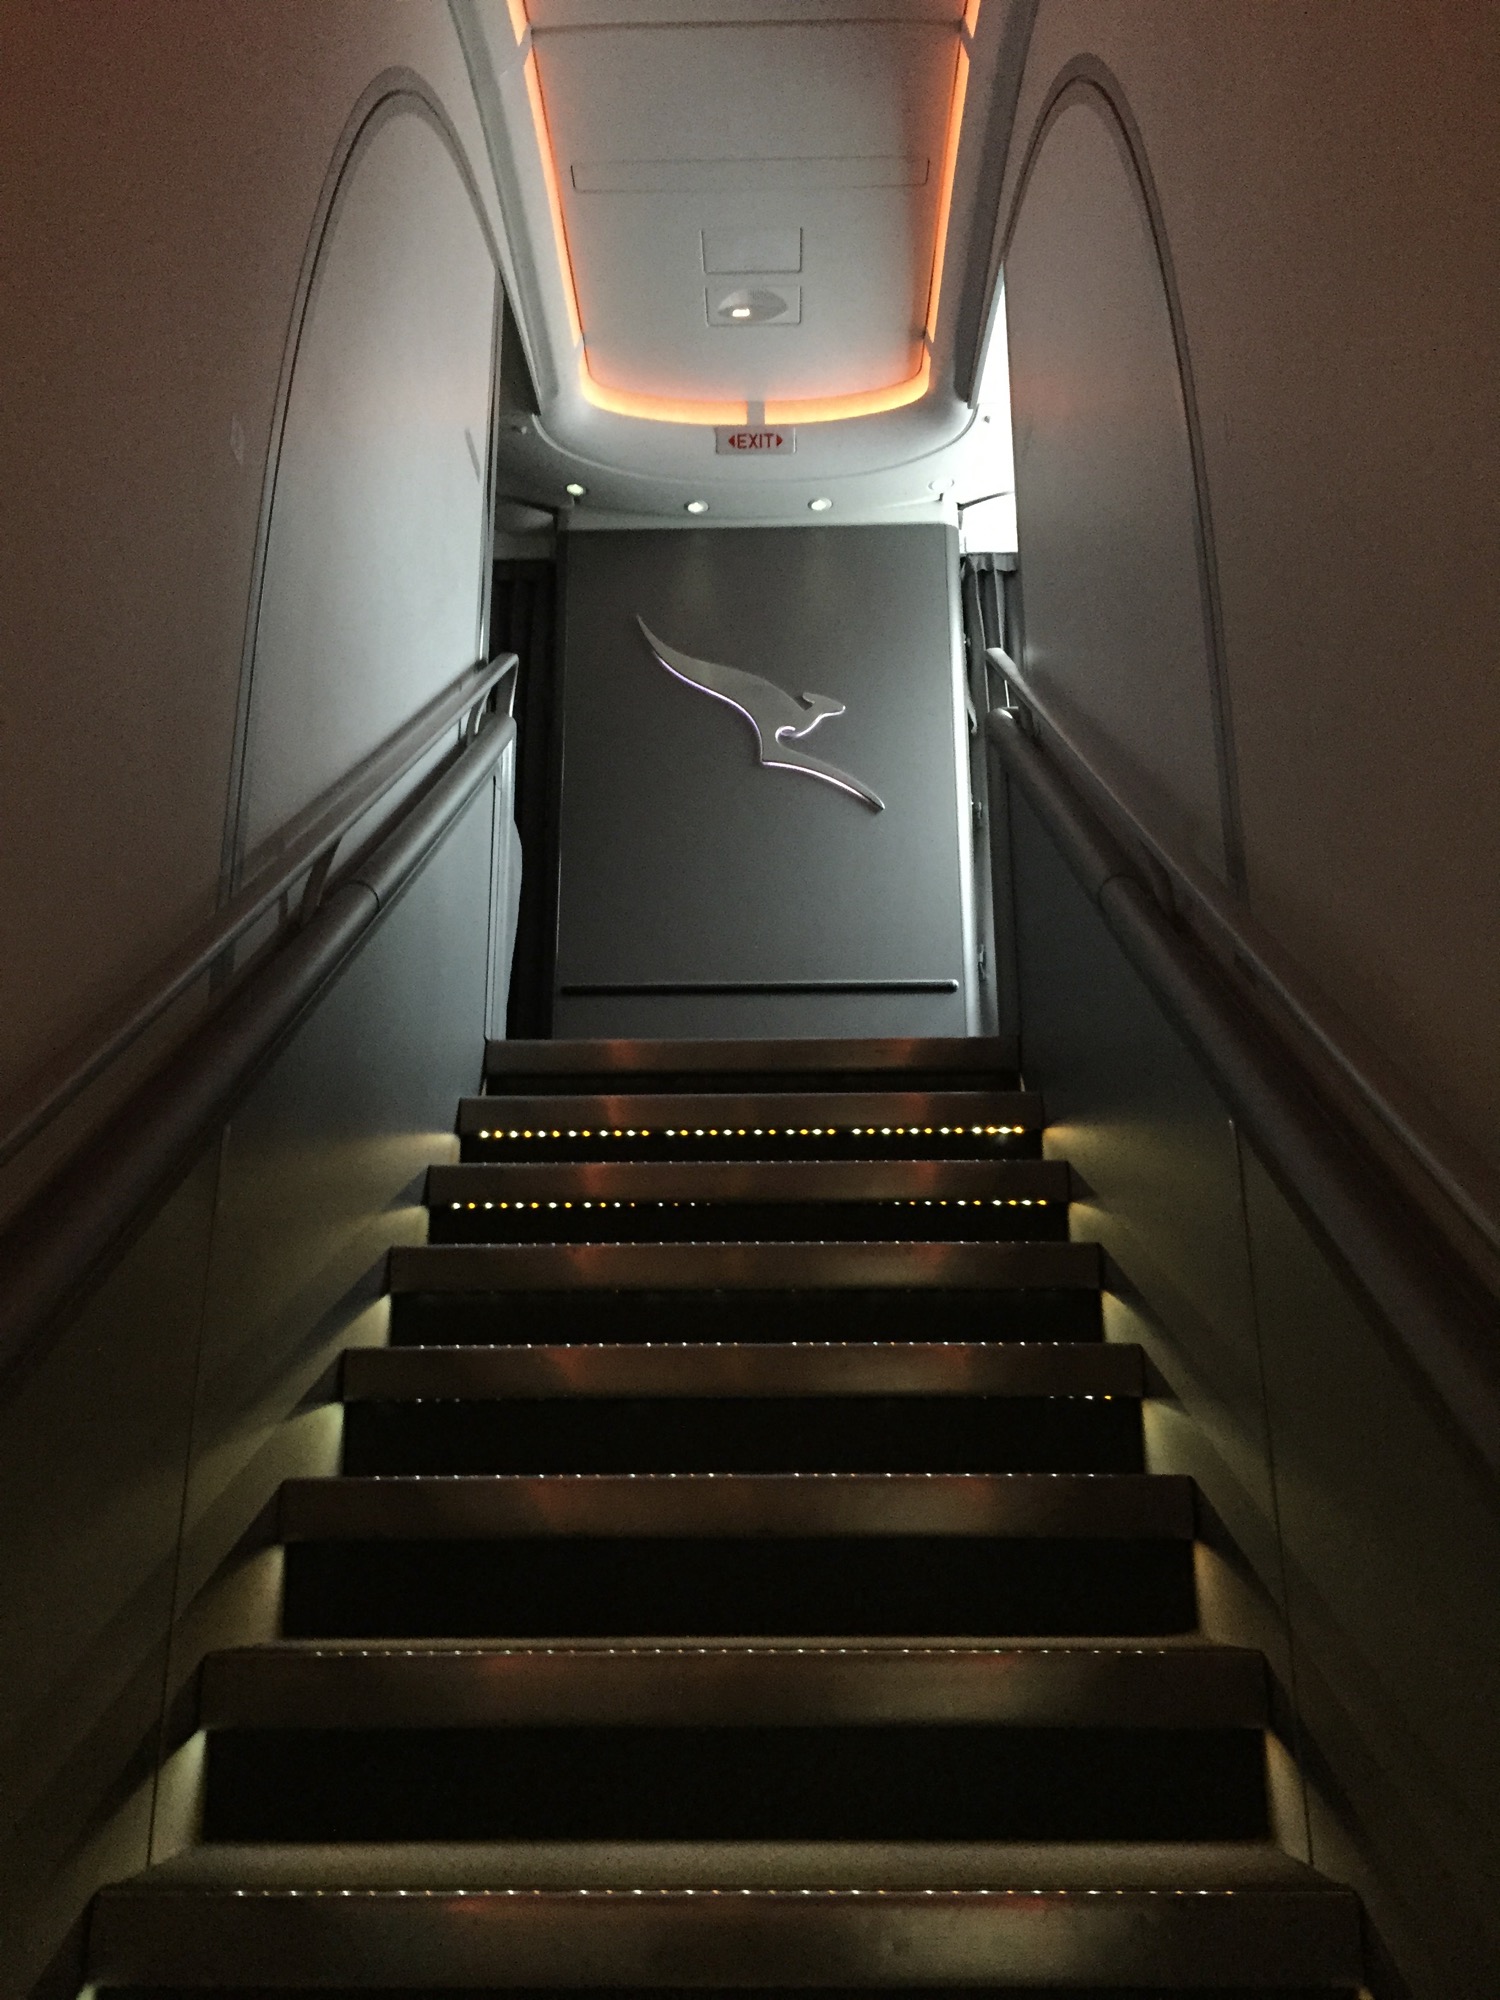 a flight of stairs with a logo on the wall